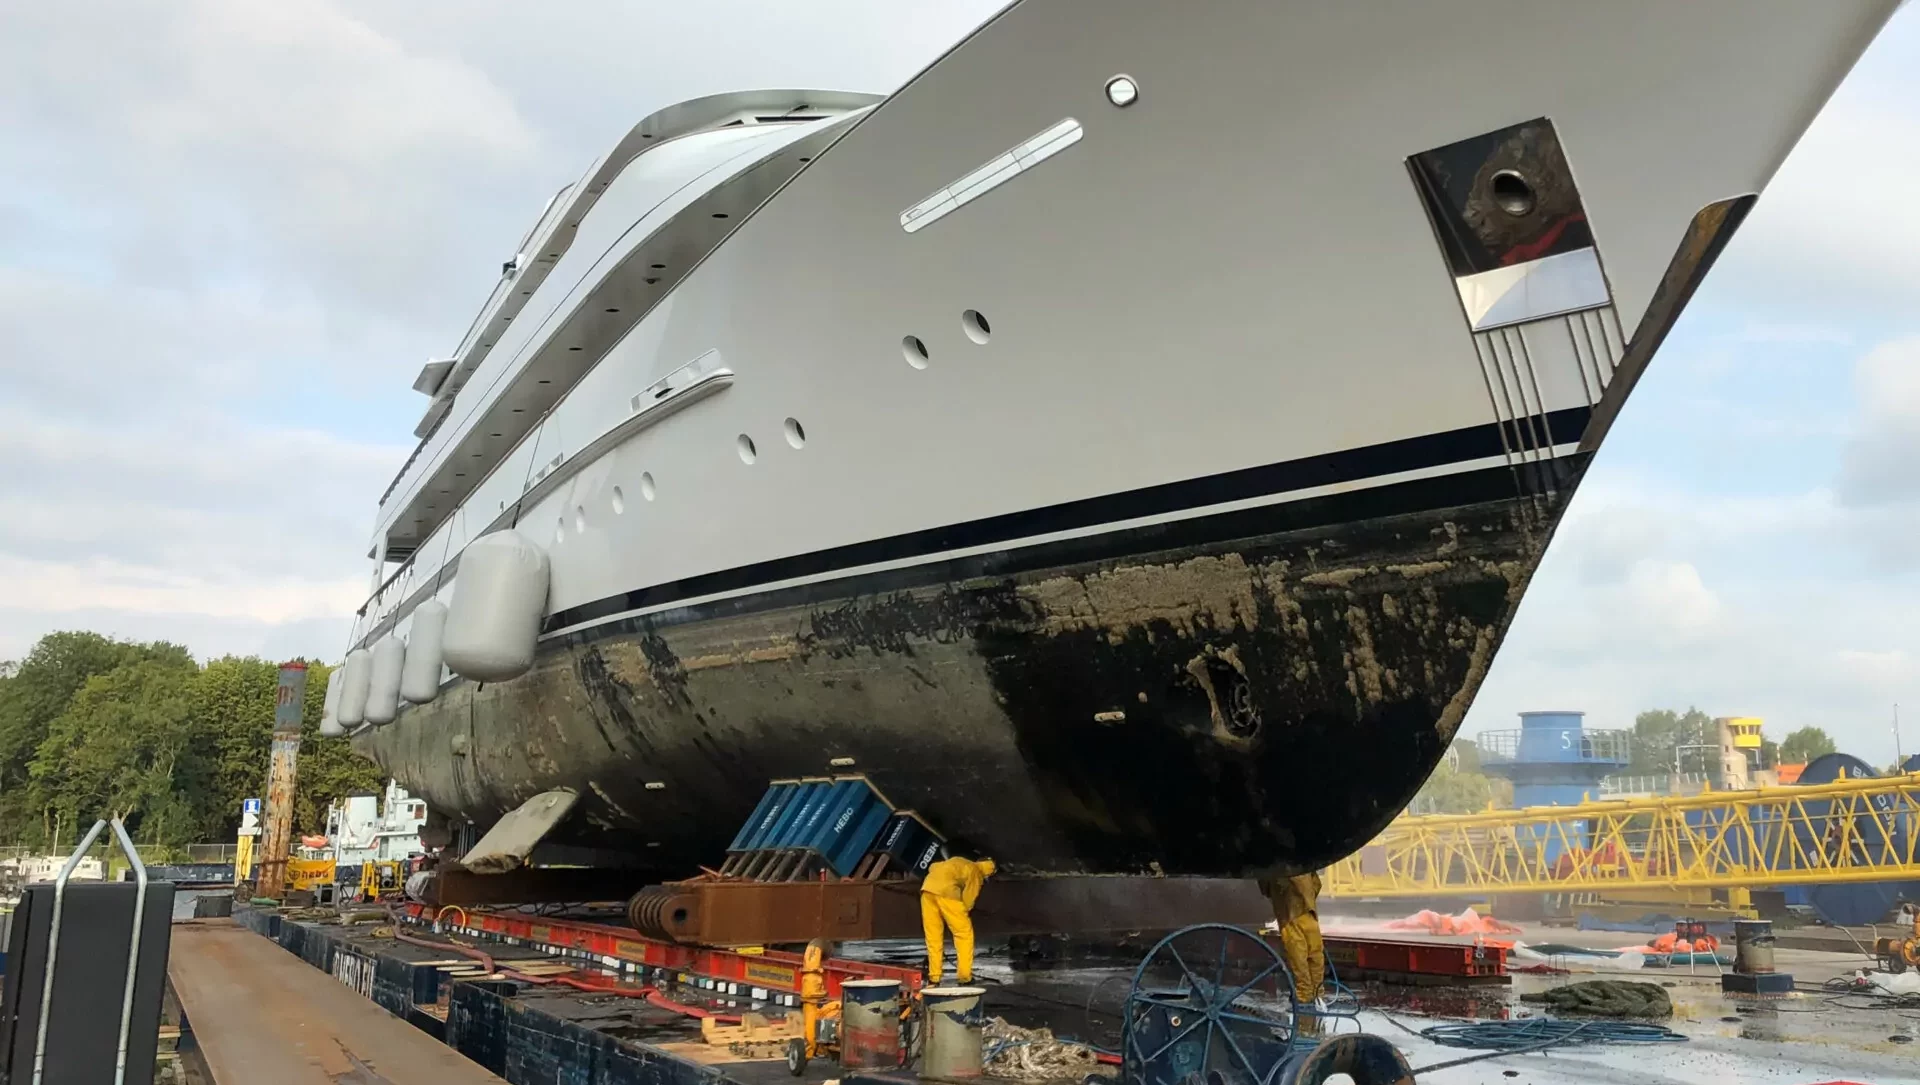 Cleaning service for yachts